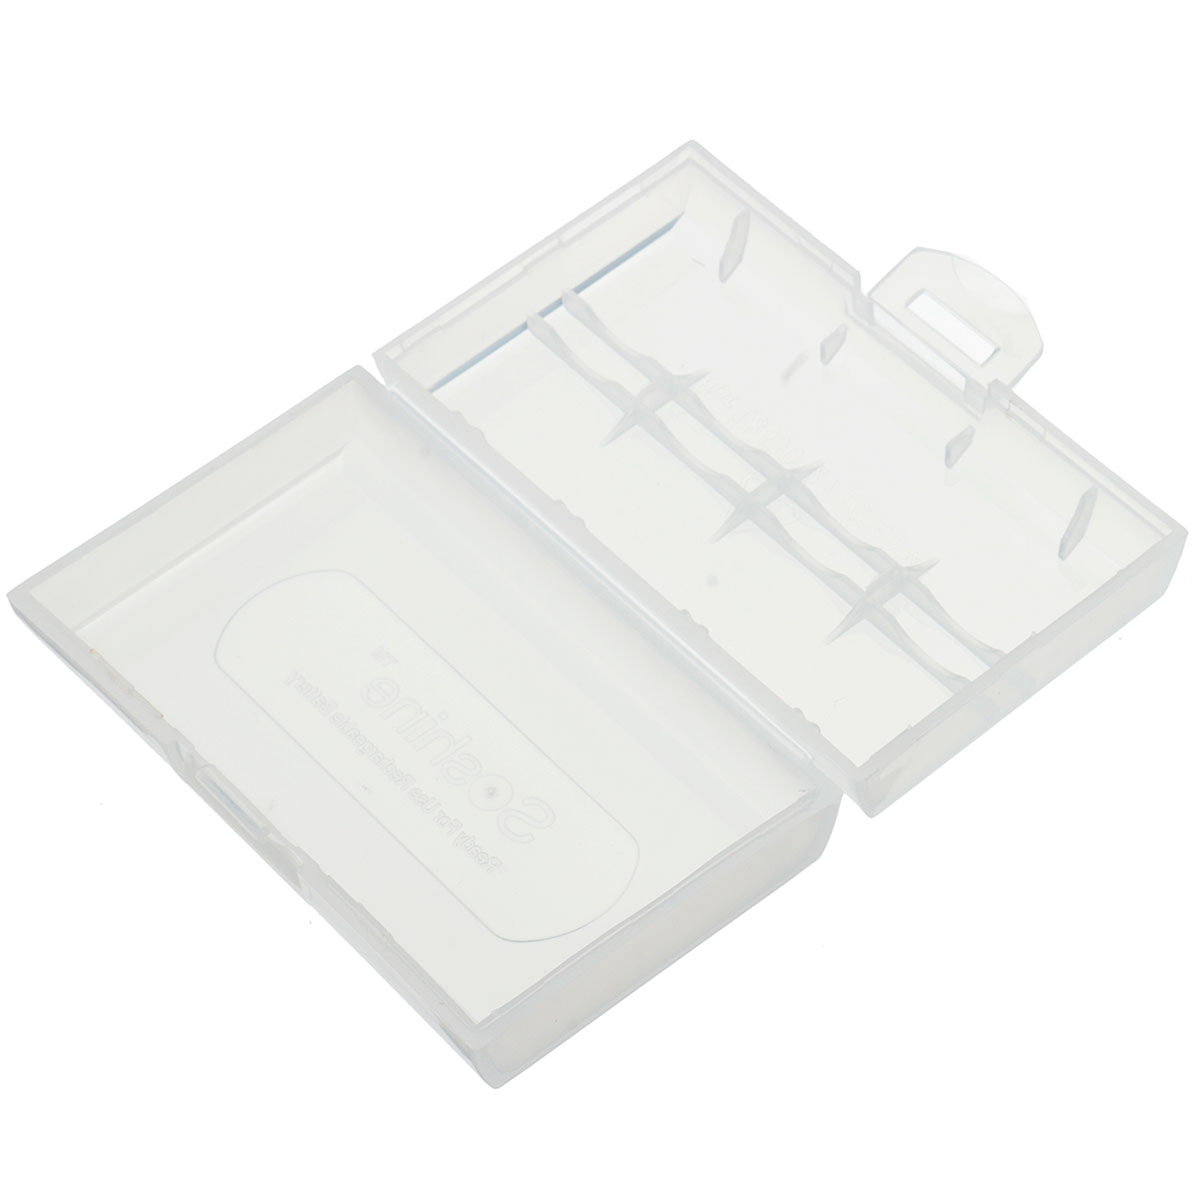 12X-Plastic-Dual-Sleeve-Cover-Case-Storage-Box-for-18650-16340CR123A-Battery-1963674-11